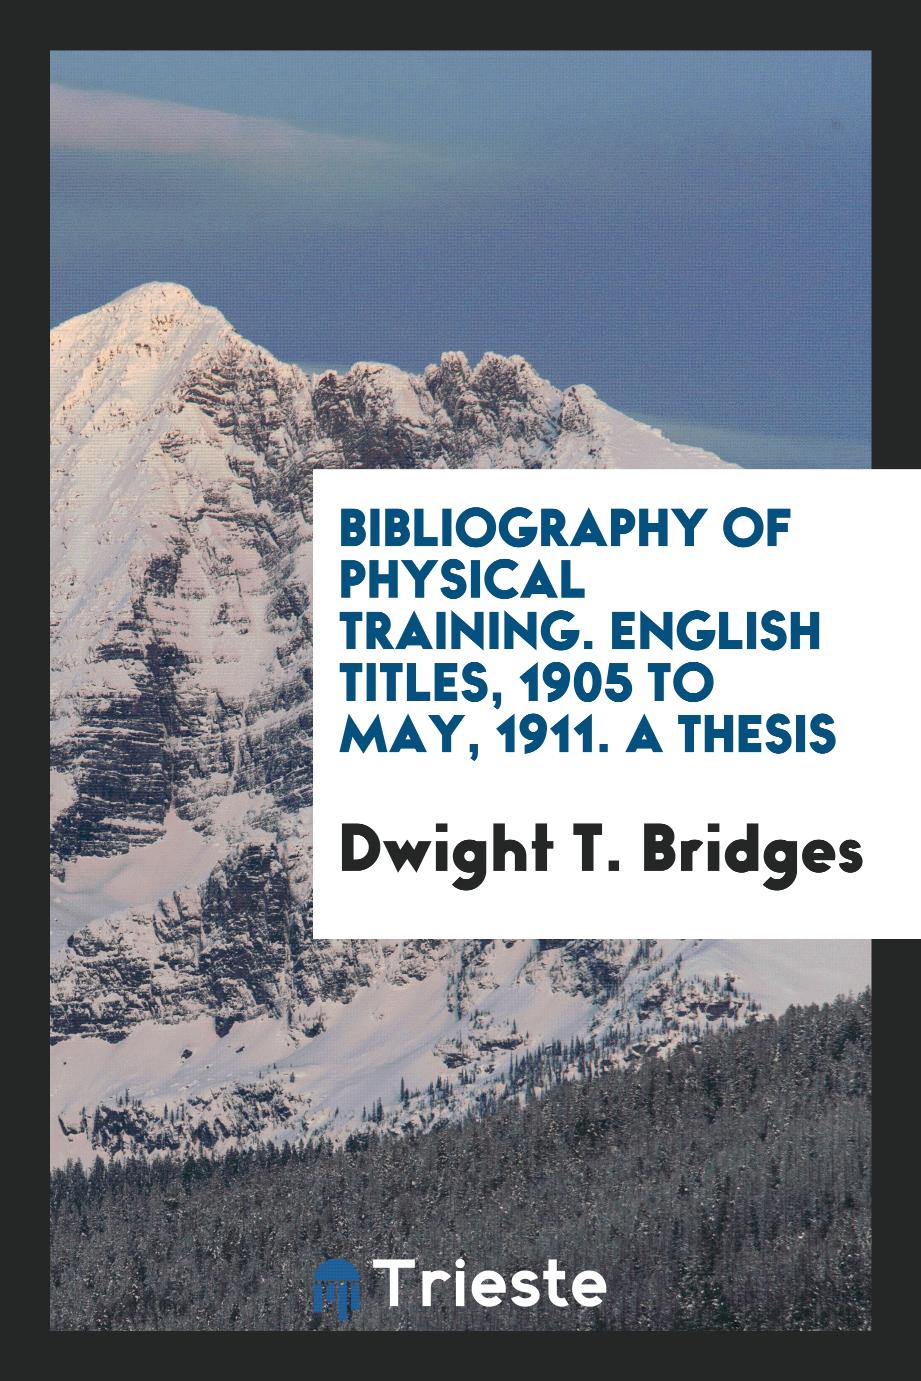 Bibliography of Physical Training. English Titles, 1905 to May, 1911. A Thesis